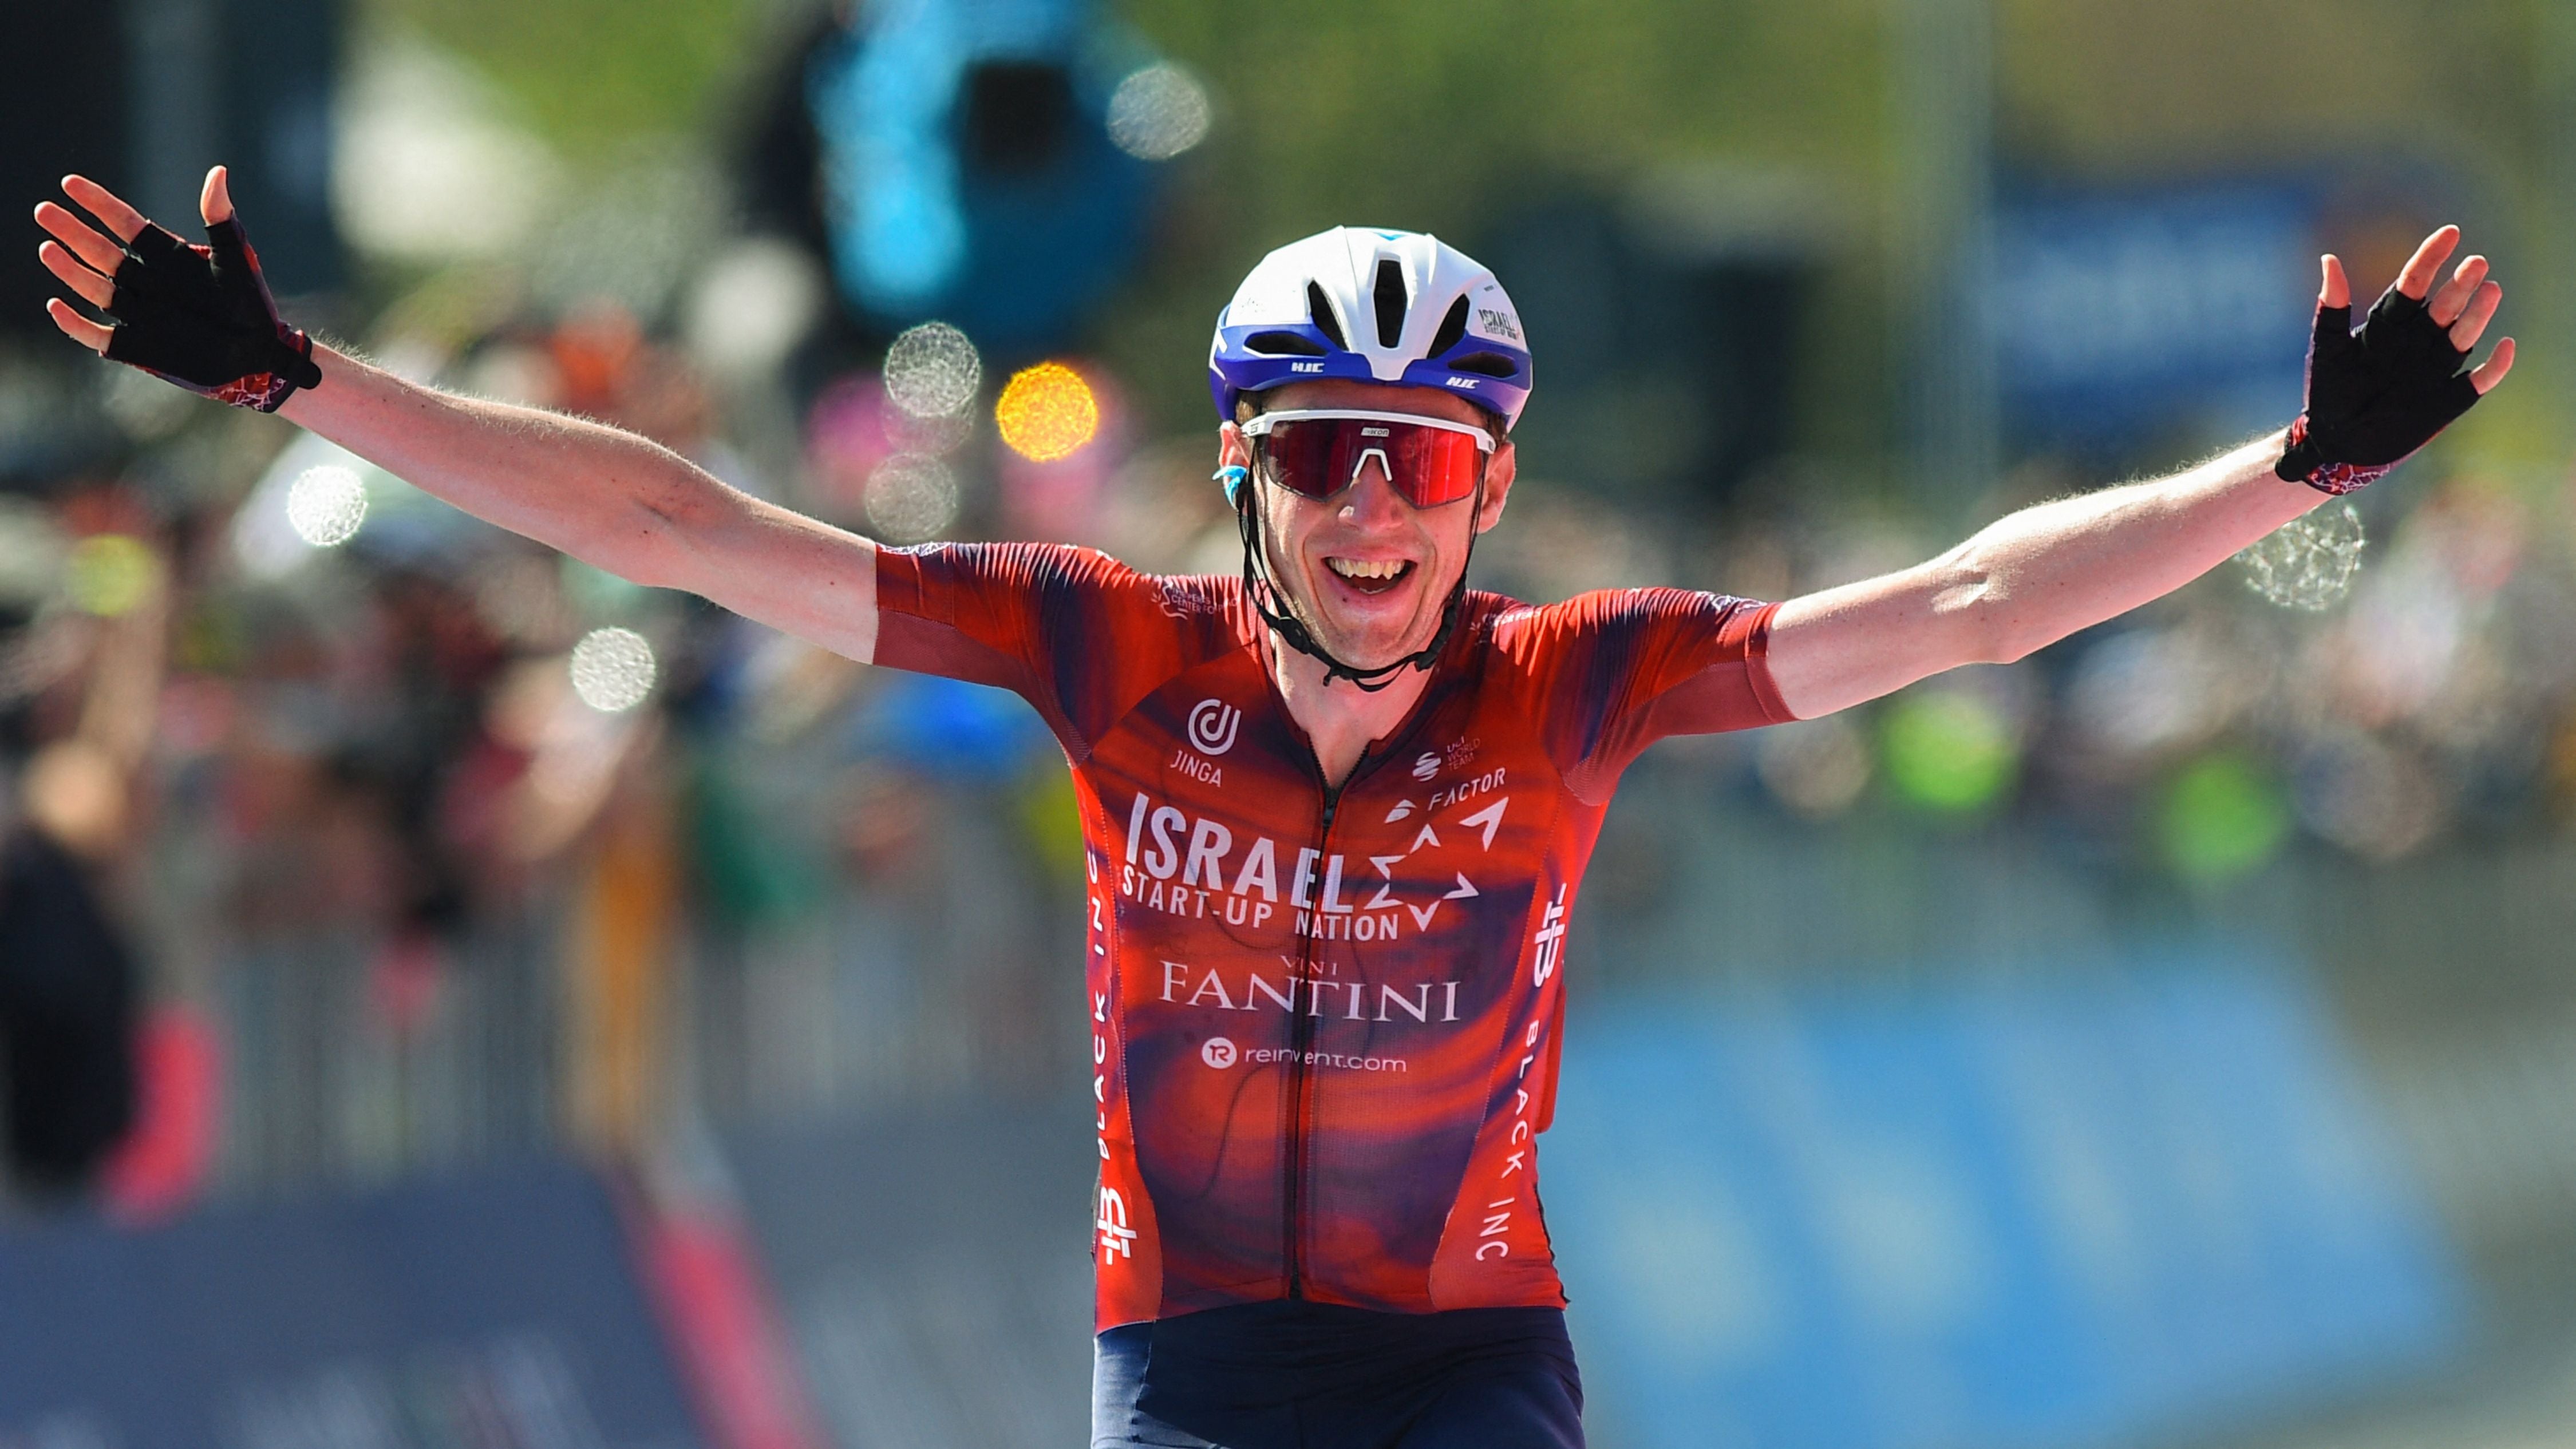 Dan Martin won Stage 17 of the 2021 Giro d’Italia to complete the set of stage wins in each of the three Grand Tours